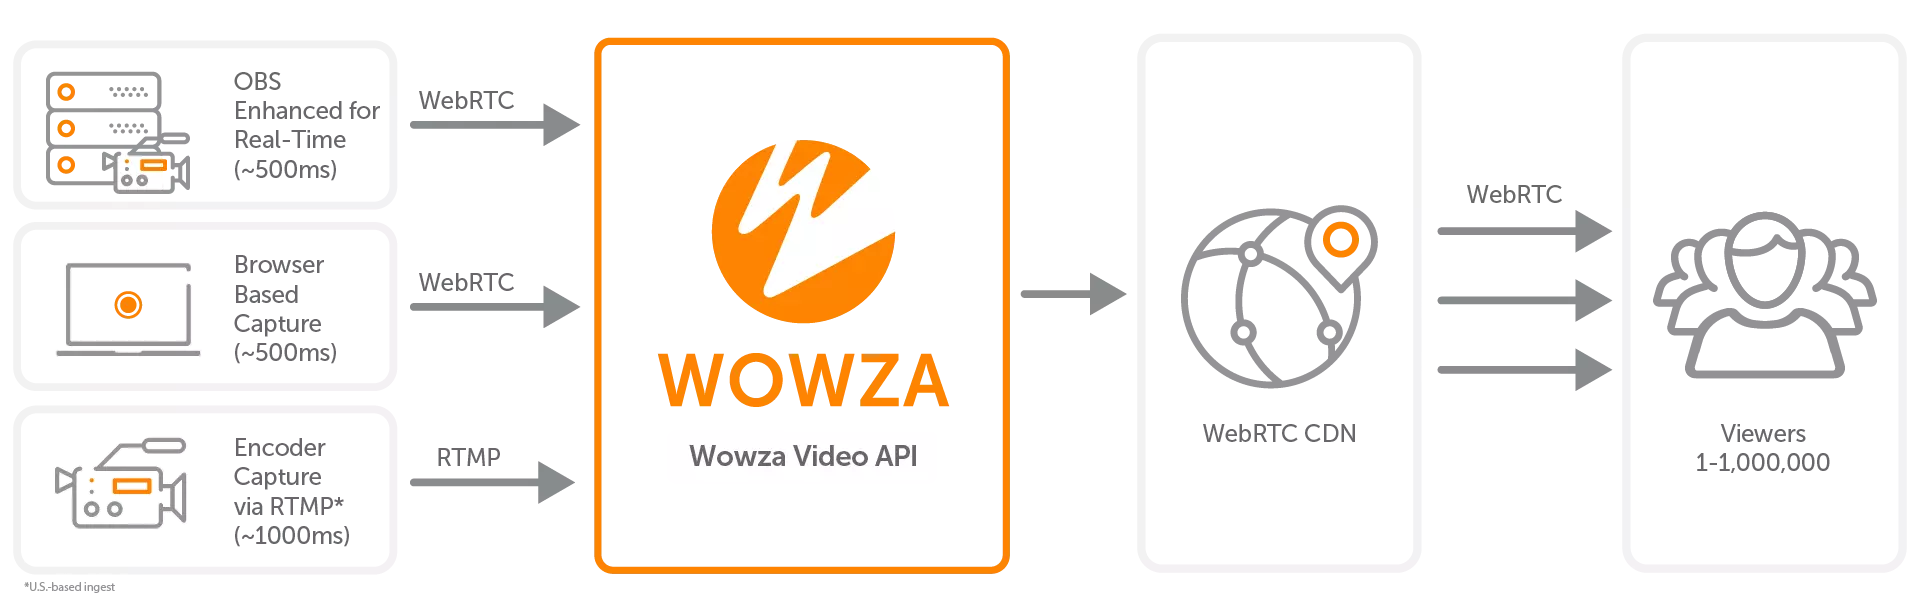 A workflow for Wowza's Real-Time Streaming at Scale solution, using WebRTC to support sub-second latency to 1,000,000 viewers.